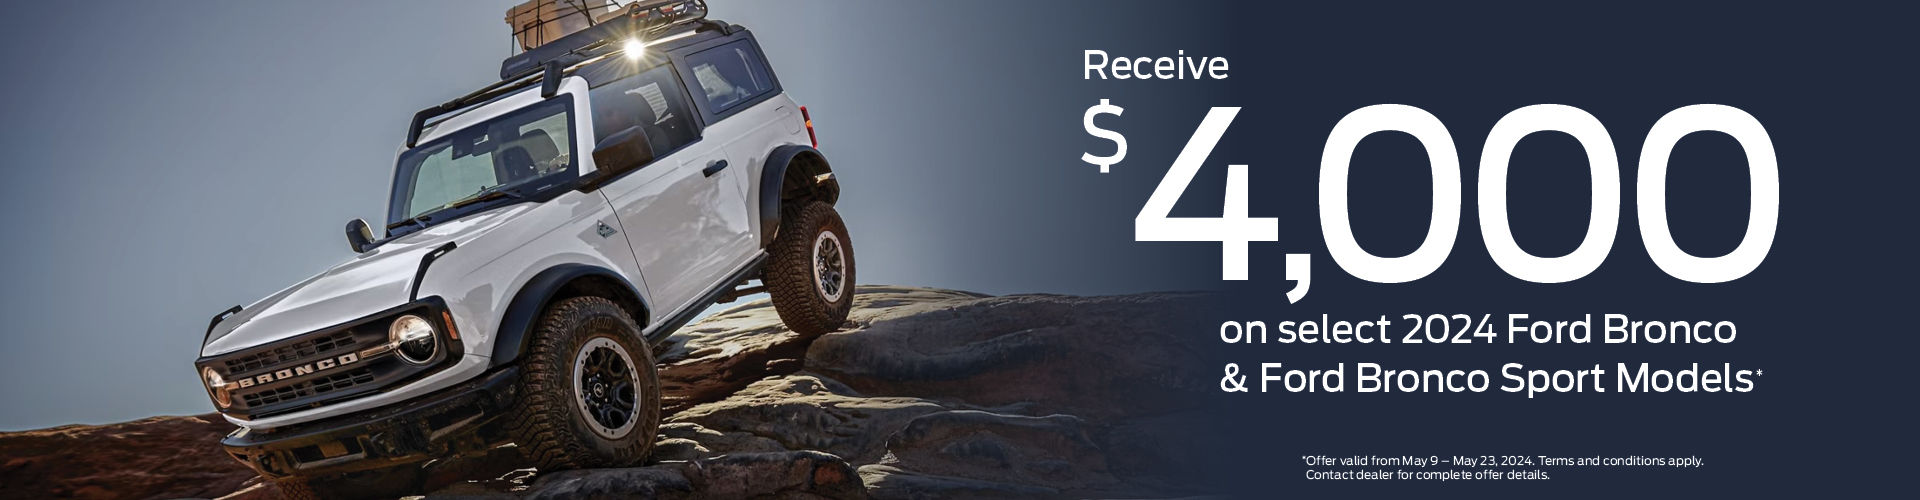 2024 Ford Bronco Offer 2 - May